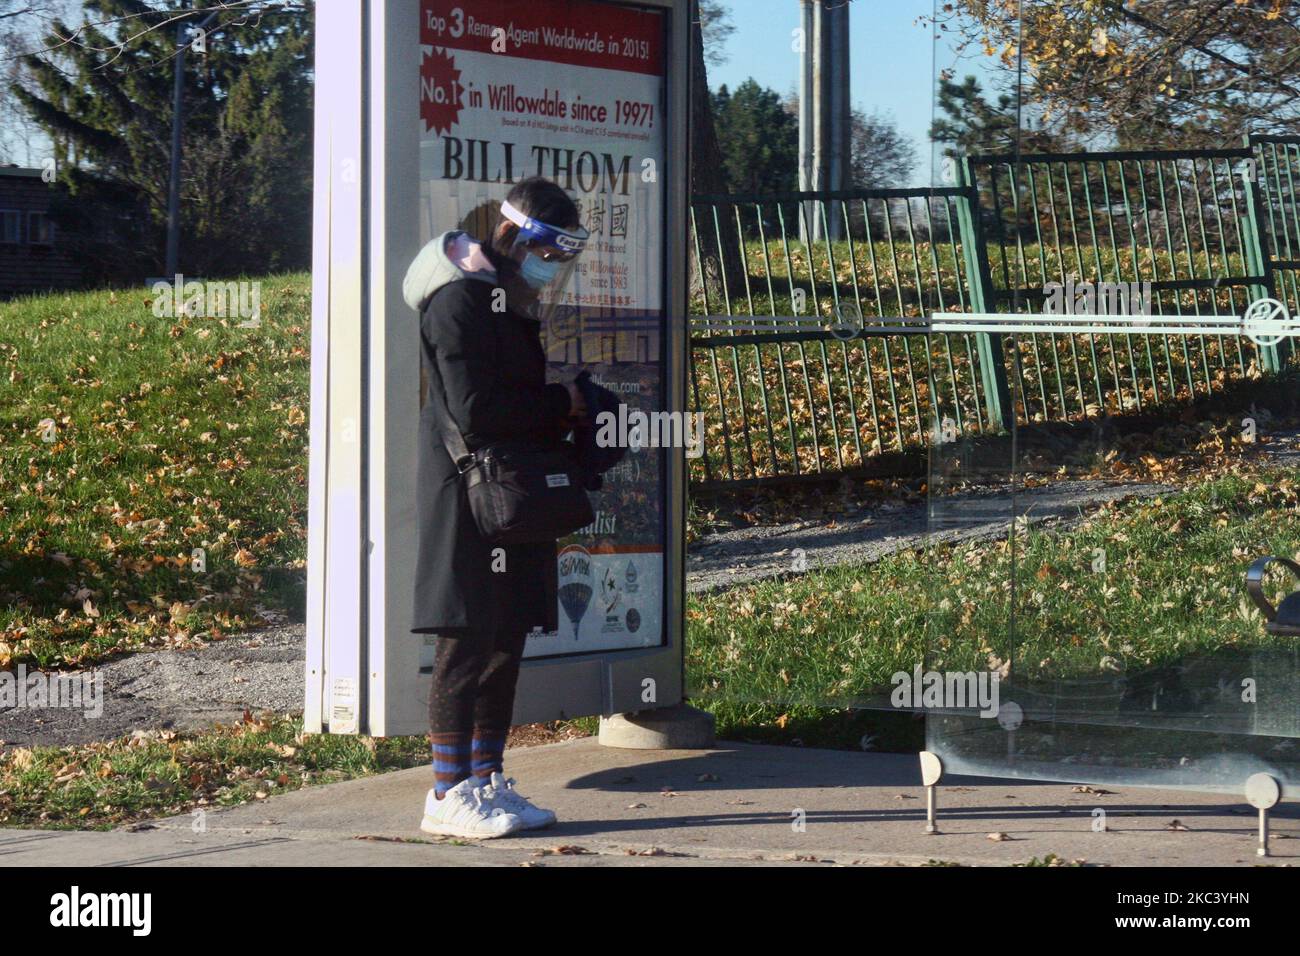 Woman wearing a plastic face shield and face mask as she waits for a public bus during the novel coronavirus (COVID-19) pandemic in Toronto, Ontario, Canada on November 12, 2020. Ontario reported 1,575 new COVID-19 cases today and 18 more deaths, setting a new single-day record for daily cases reported in a 24-hour period since the start of the pandemic. New modeling projections warn that Ontario could see 6,500 daily cases of COVID-19 by mid-December. The projections also suggest that the number of COVID-19 patients in intensive care units will exceed the 150 threshold within two weeks, overw Stock Photo